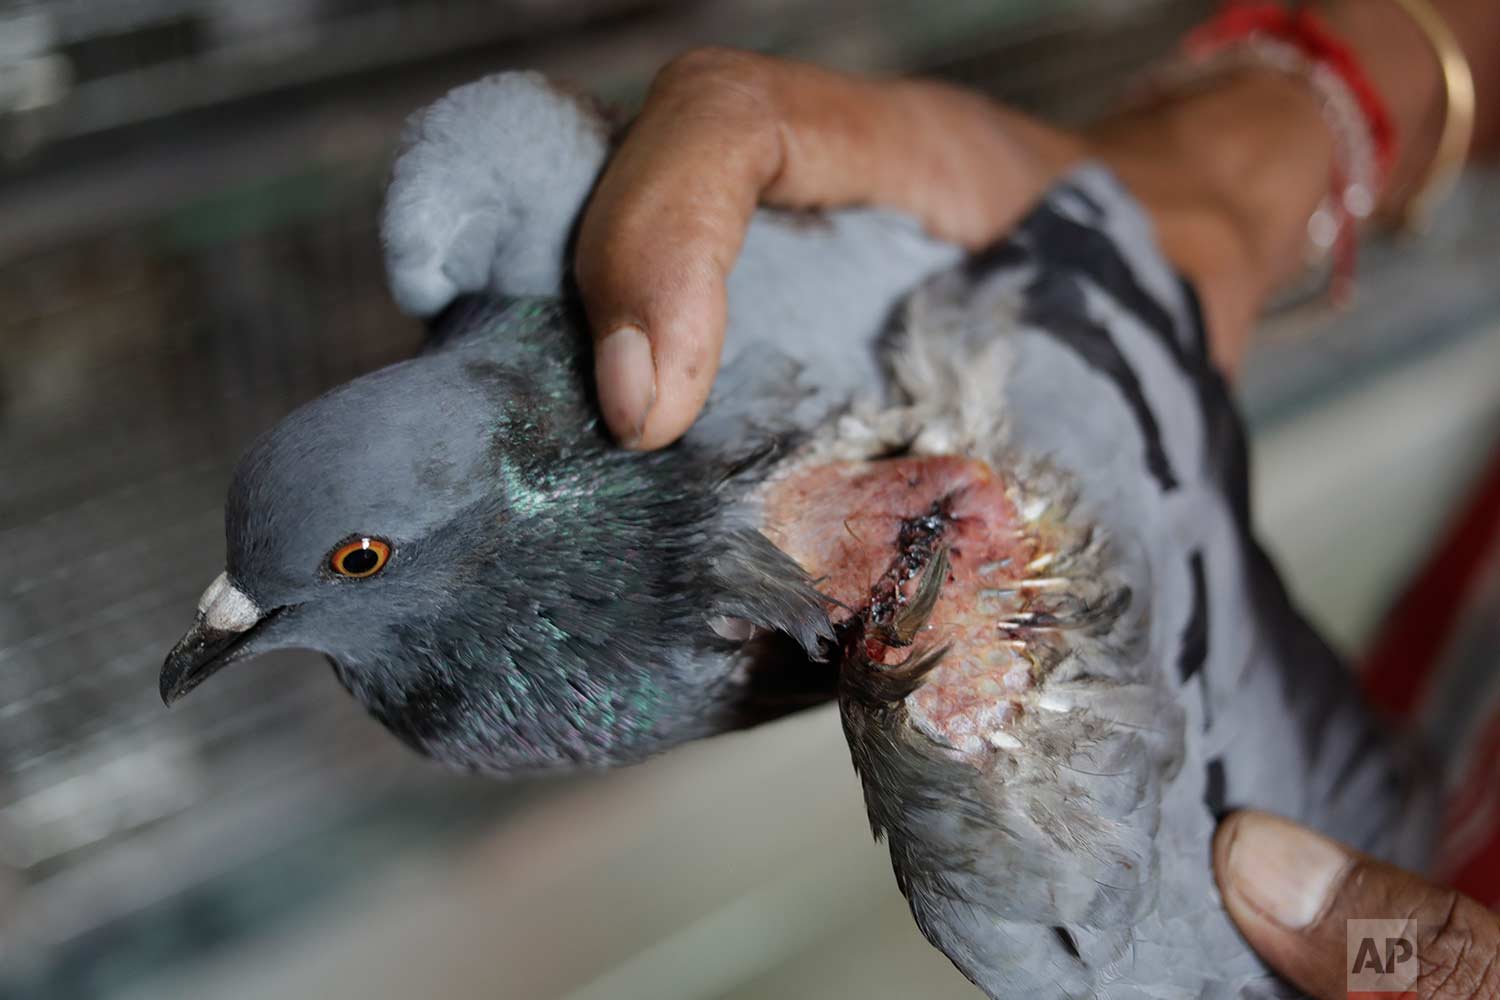  In this Wednesday, Aug. 16, 2017 photo, a helper displays injury caused by kite strings on a pigeon at the Charity Birds Hospital in New Delhi, India. (AP Photo/Tsering Topgyal) 